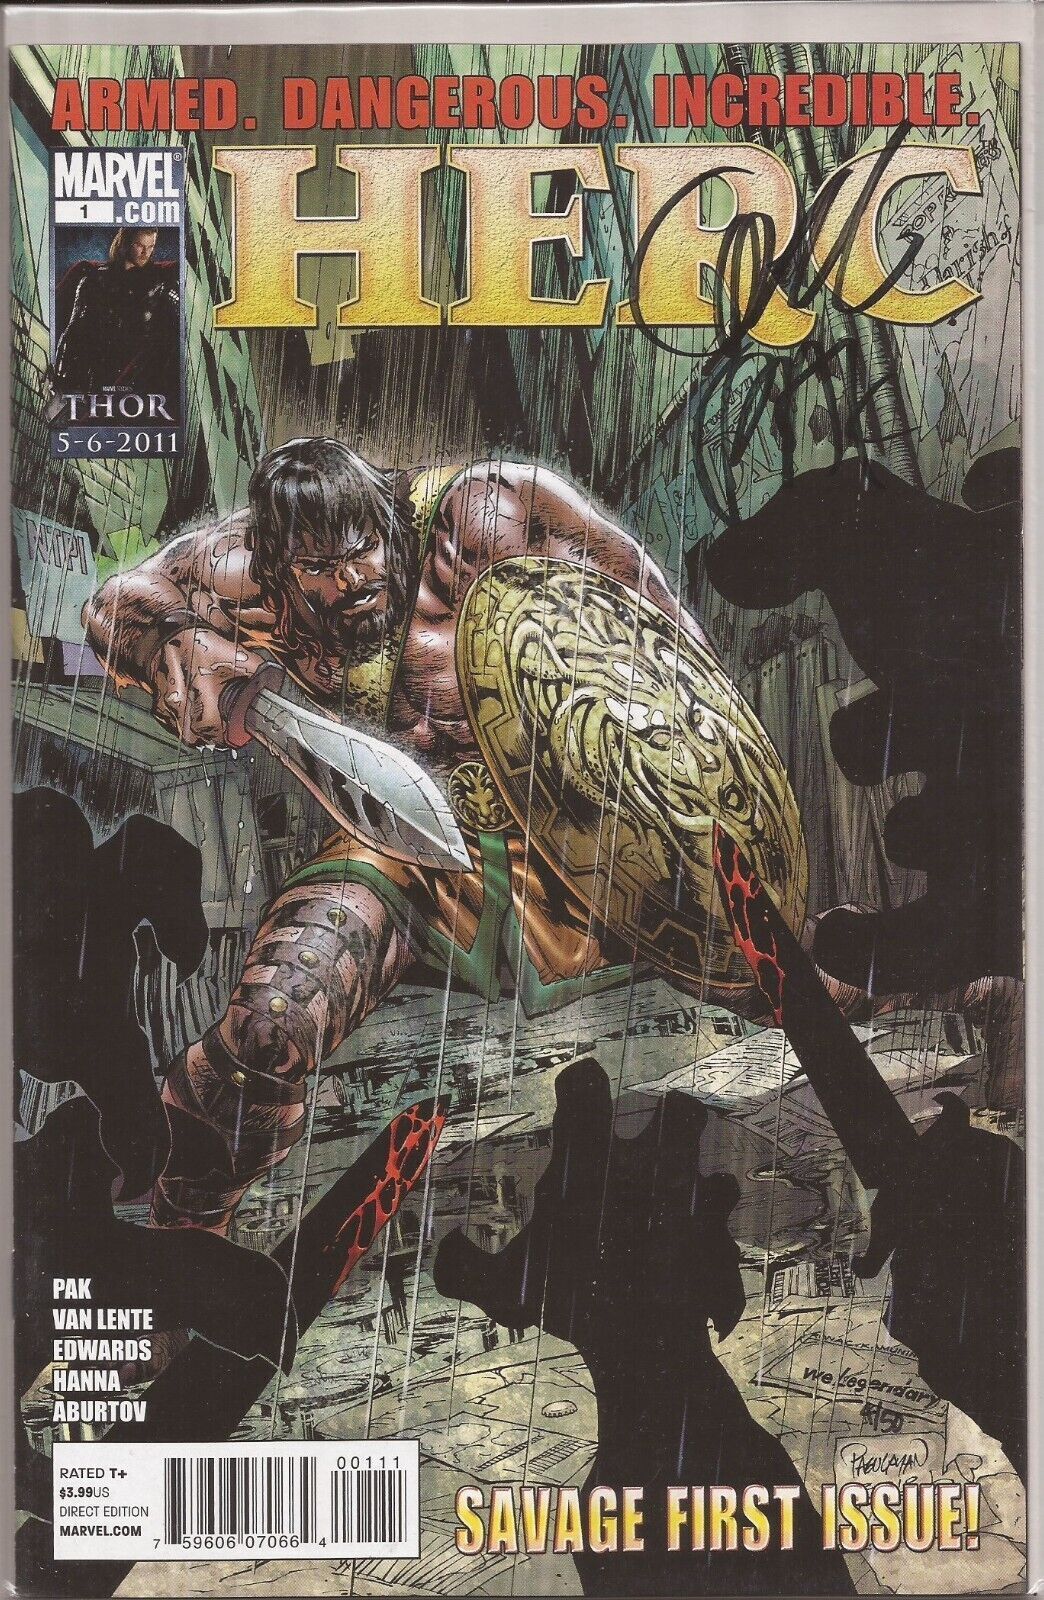 HERC #1 - SIGNED BY GREG PAK - LIMITED TO ONLY 50 COPIES W/ DF COA 4/50